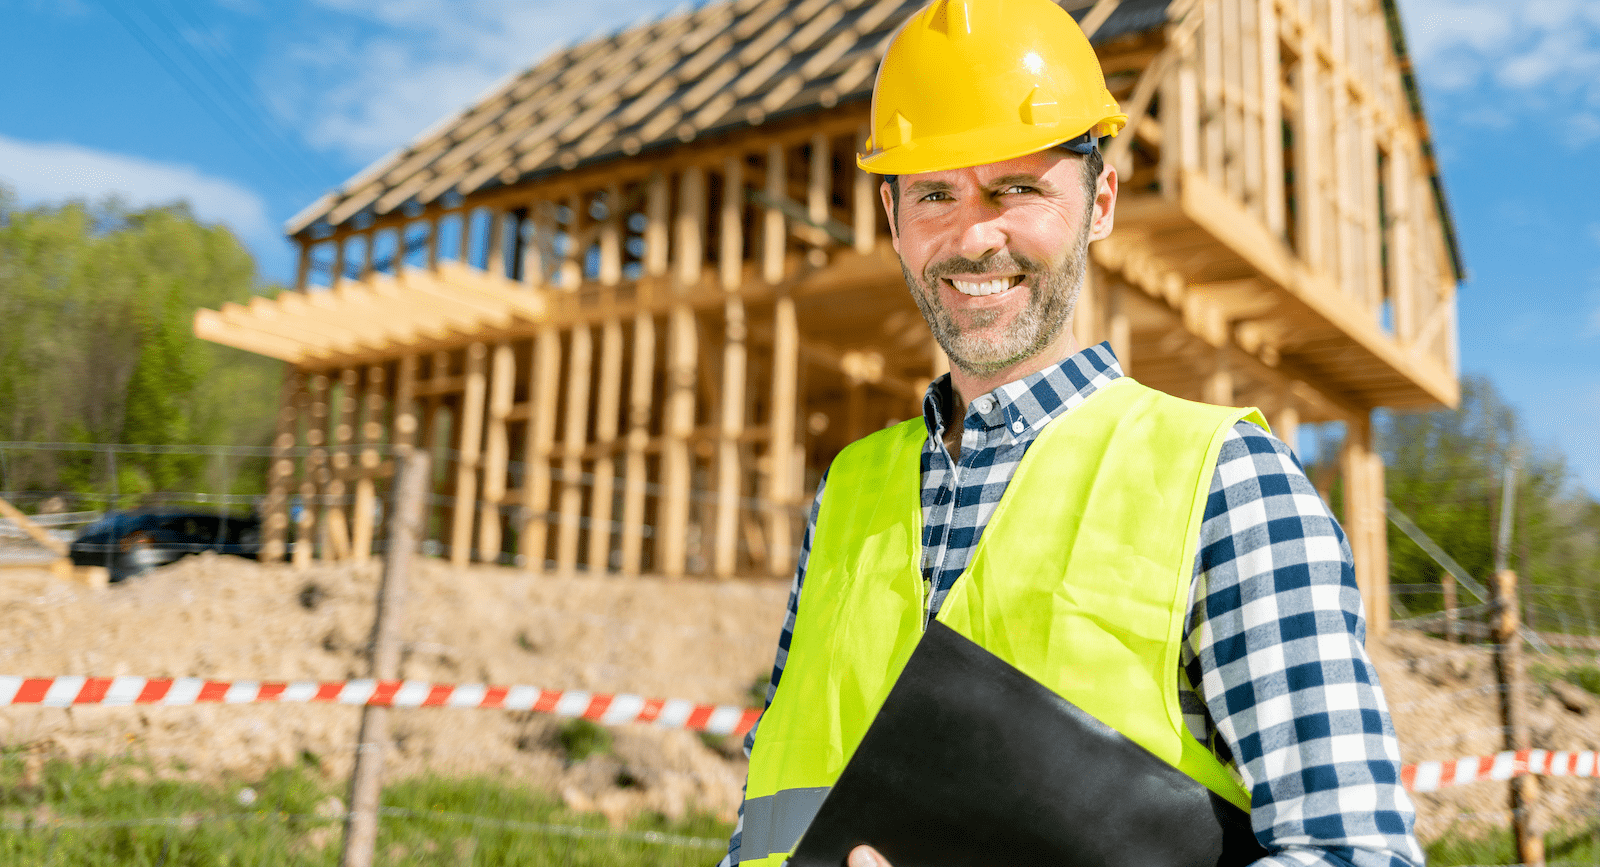 Pro Builder's 2024 forecast shows home builders are optimistic like this smiling builder on the jobsite